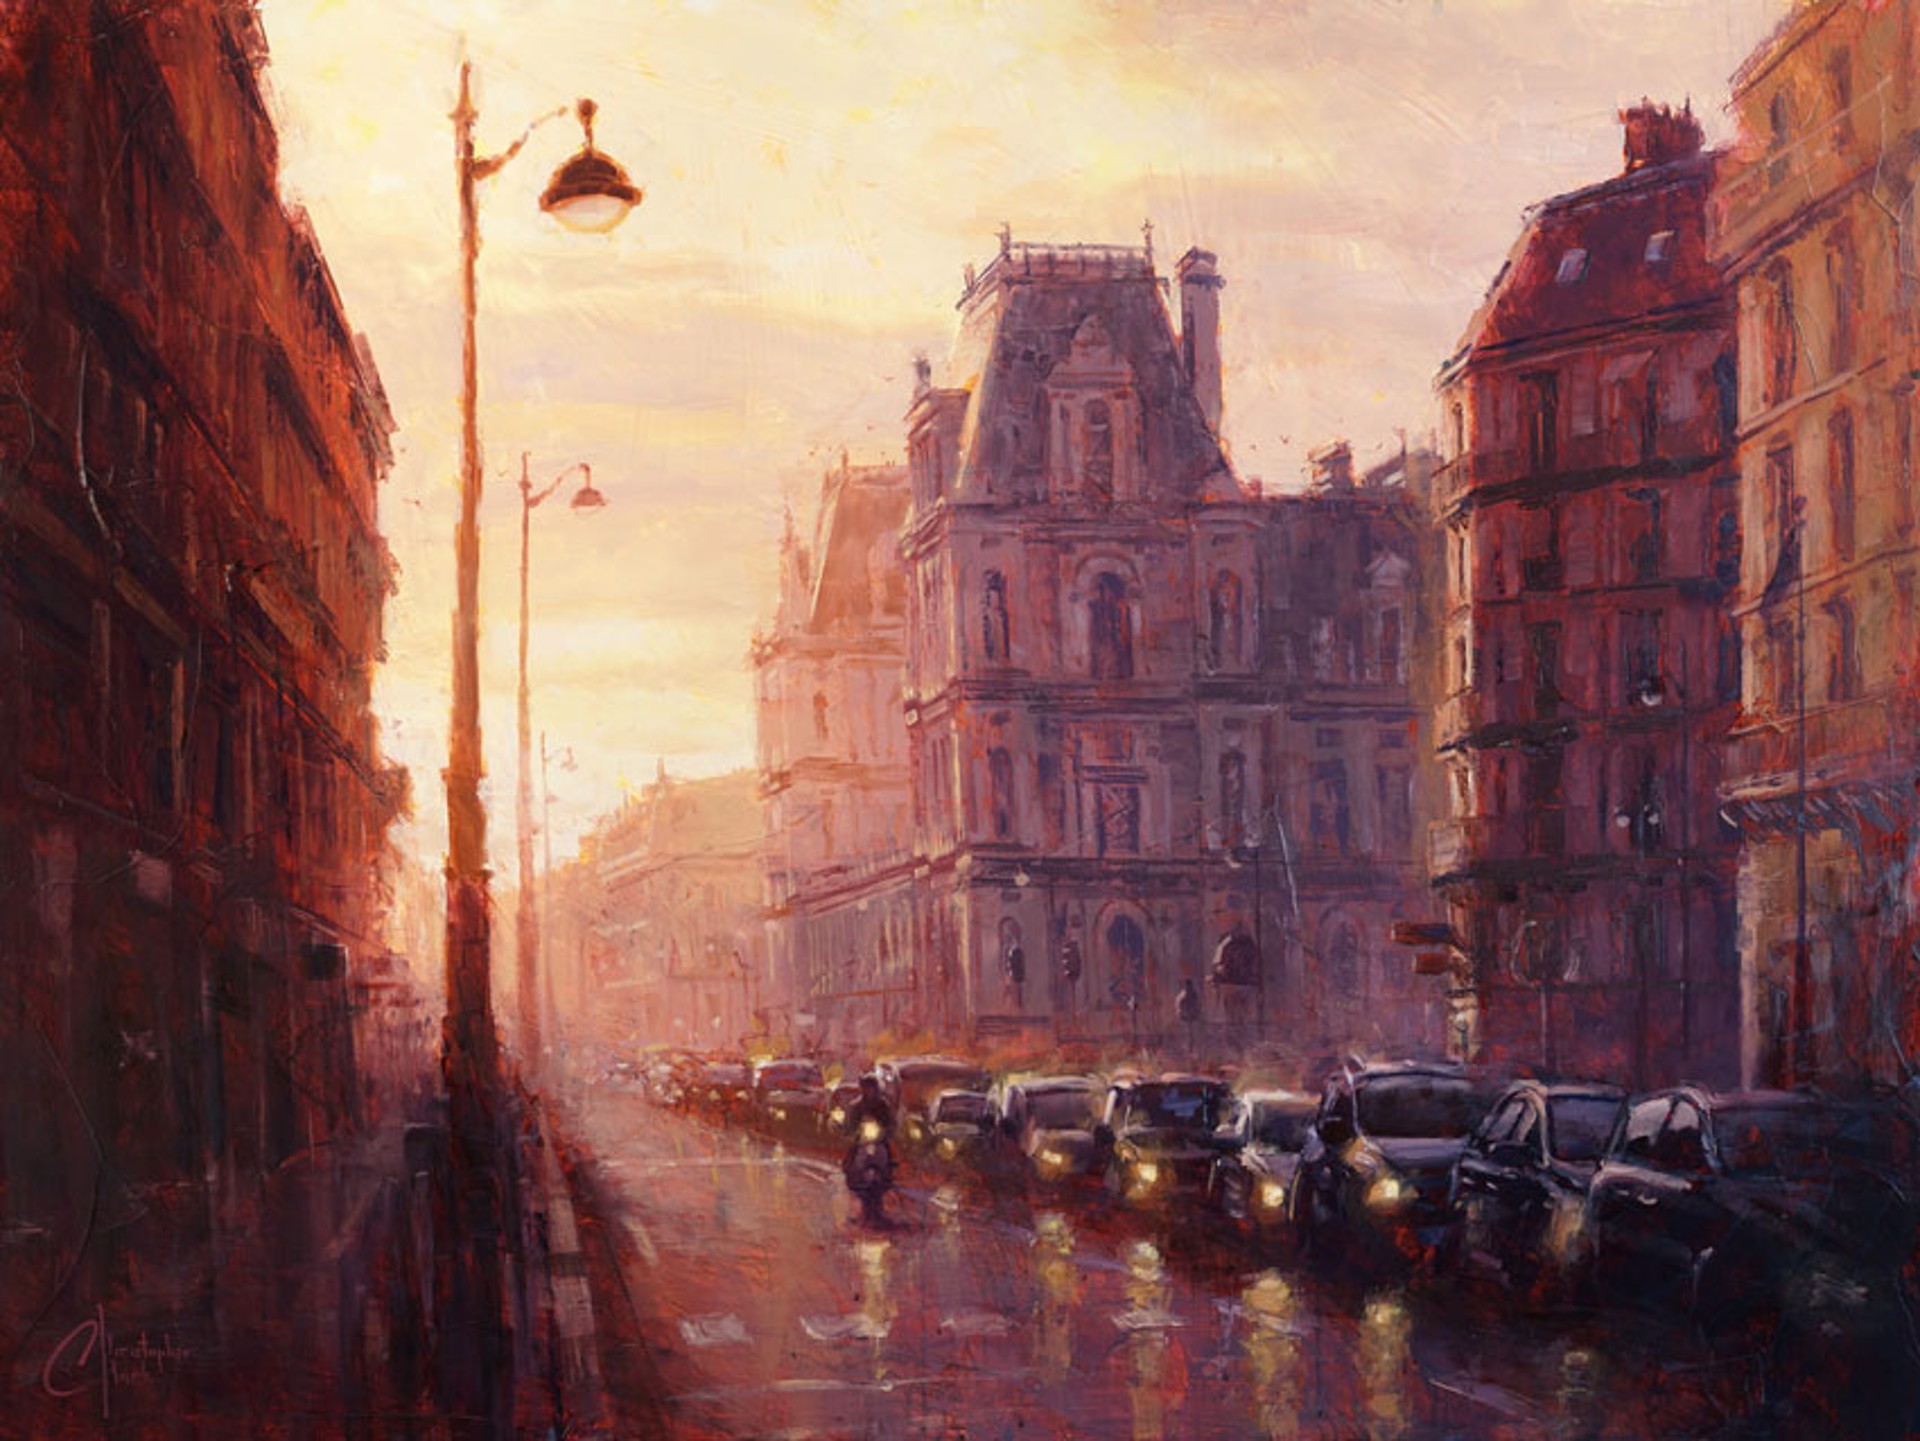 The Light of Paris by Christopher Clark